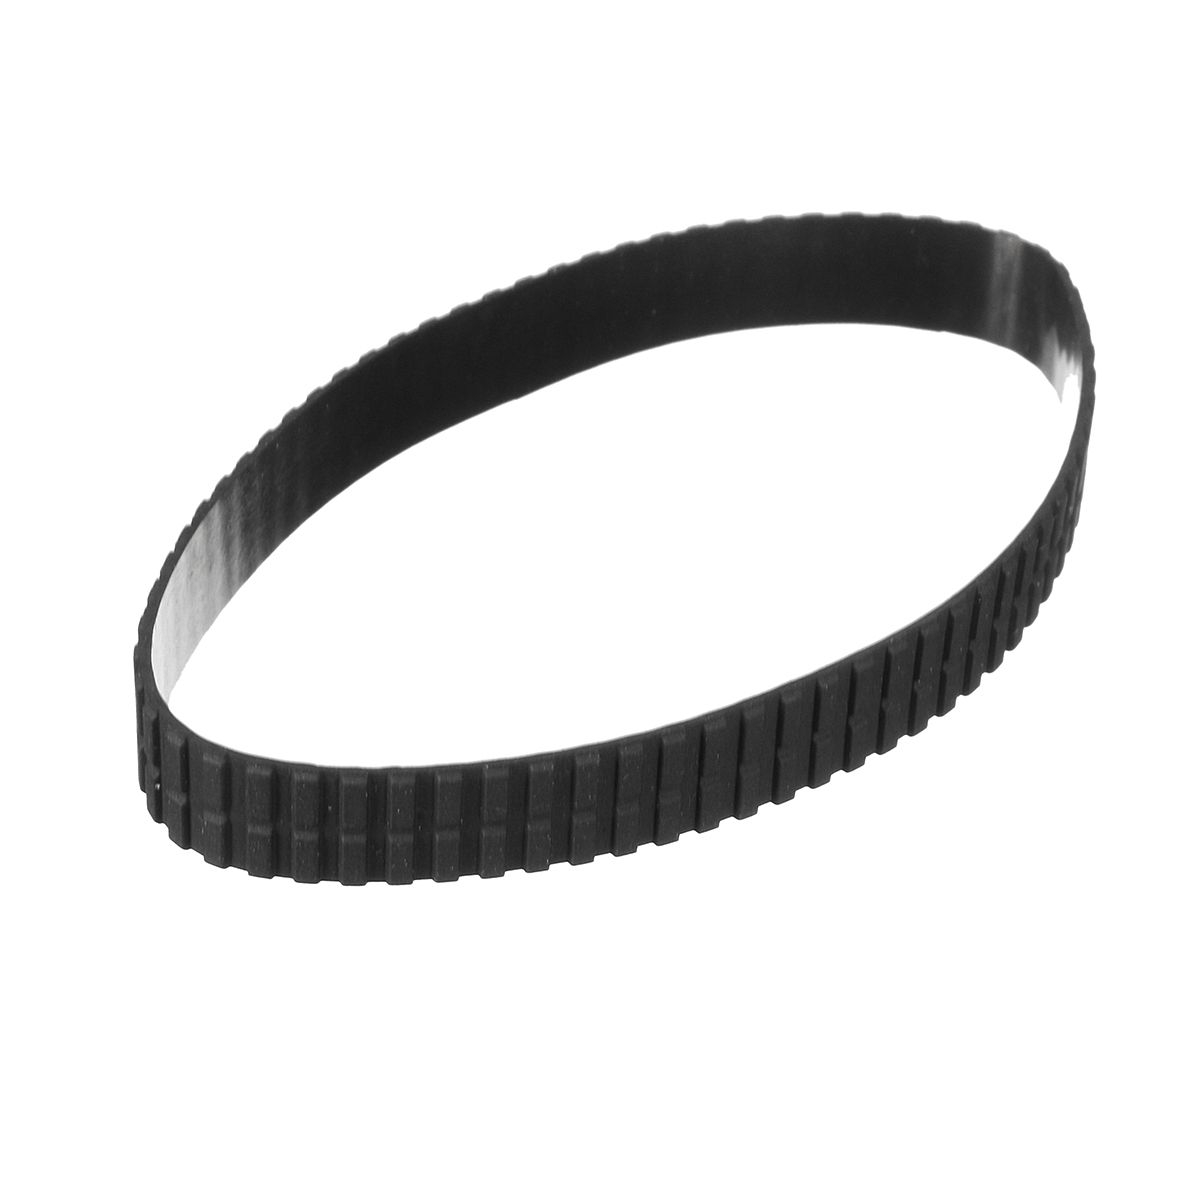 Zoom-Focusing-Rubber-Lens-Rubber-Ring-Replacement-Part-For-Tamron-24-70-128-1427690